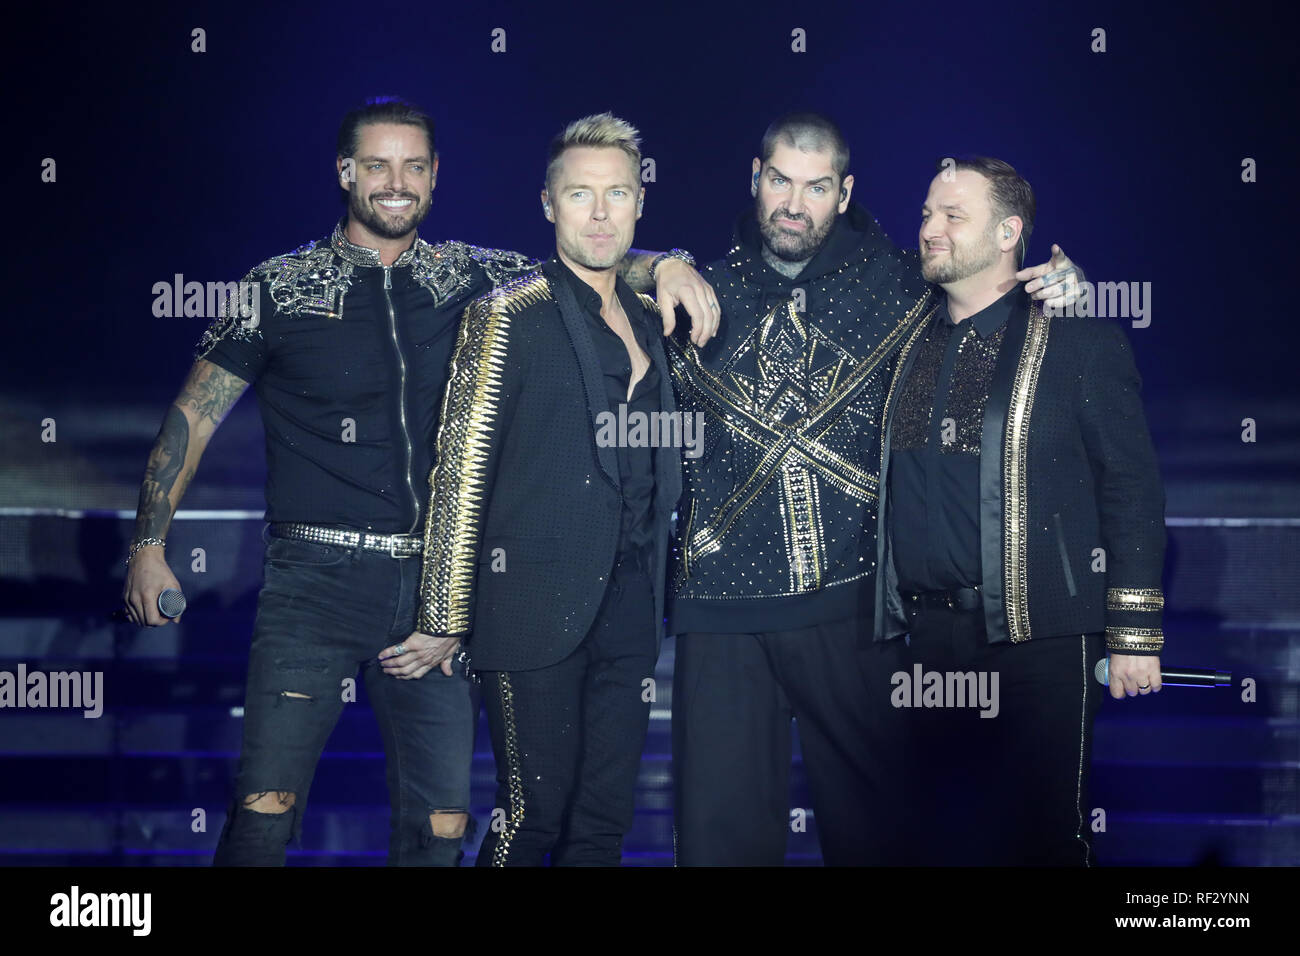 (left to right) Keith Duffy, Ronan Keating, Shane Lynch and Mikey Graham of Boyzone on stage at the SSE Arena, Belfast, as part of the band's Thank You & Goodnight farewell tour. Stock Photo